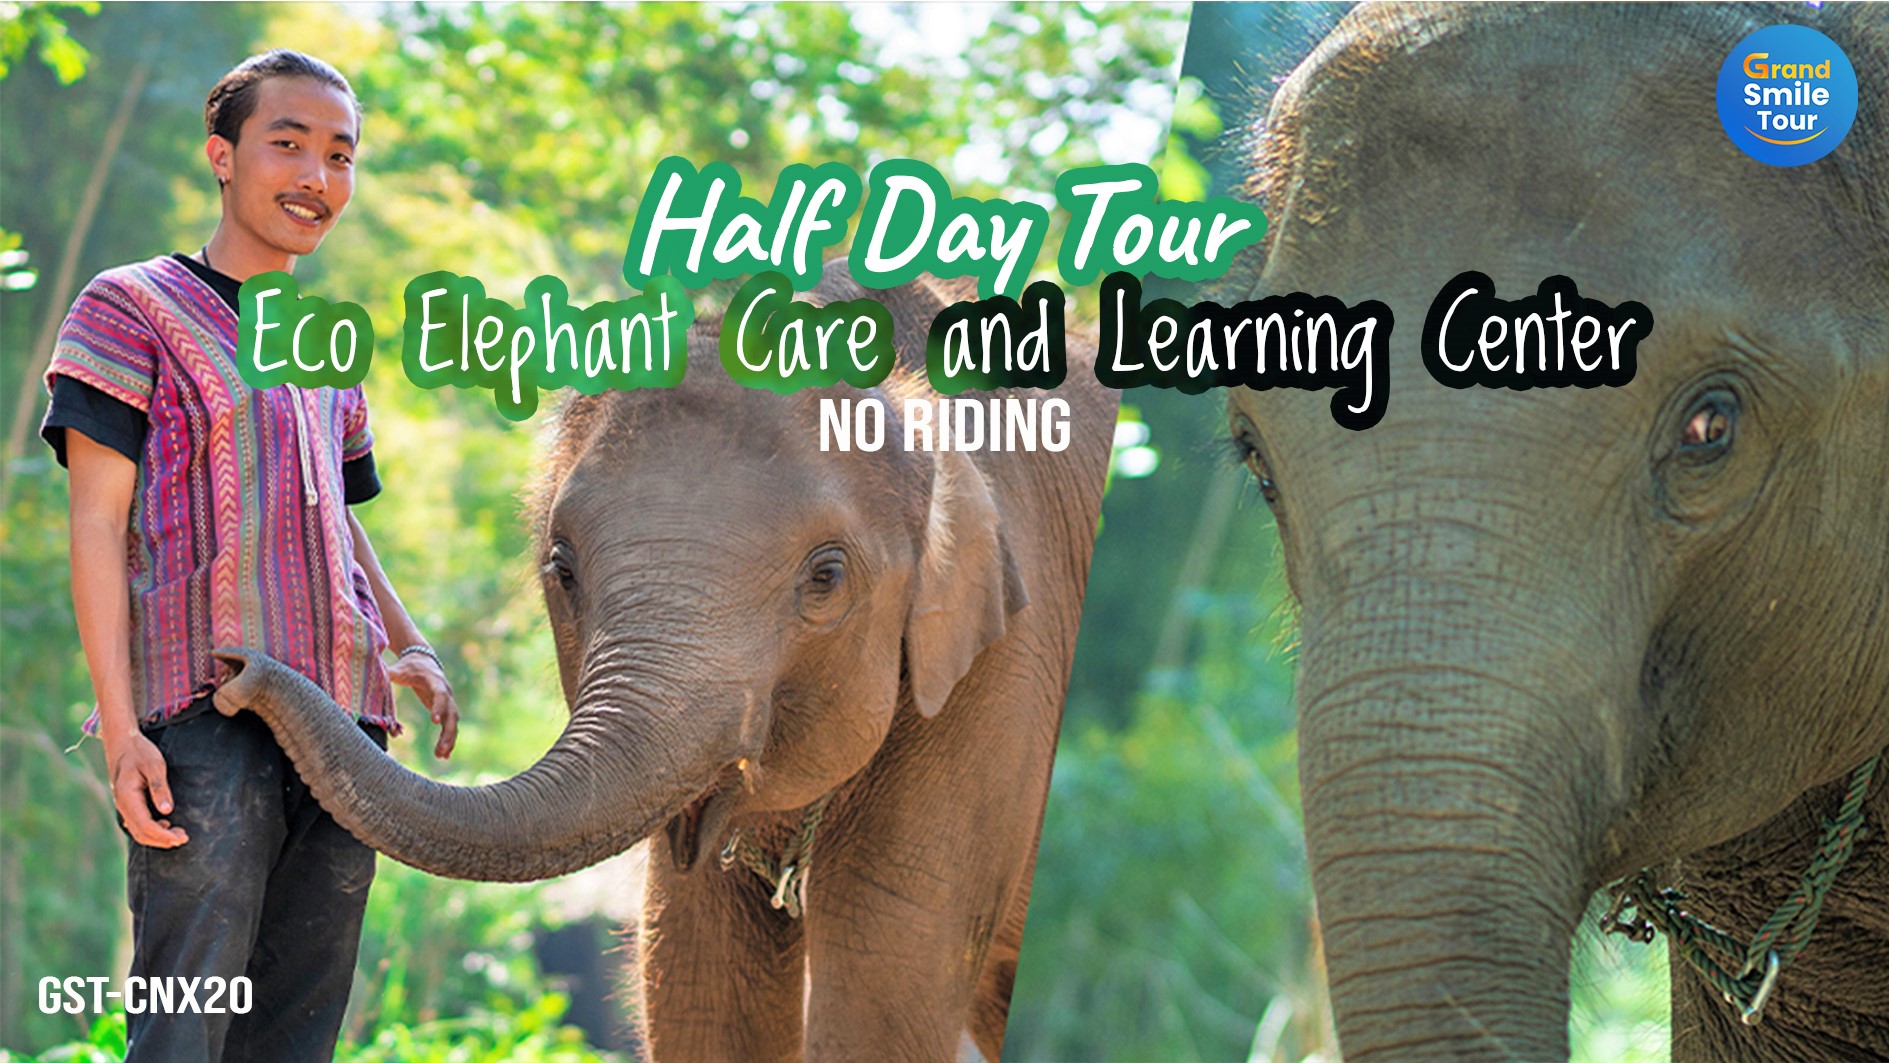 GST-CNX20 Half Day Eco Elephant Care & Learning Center